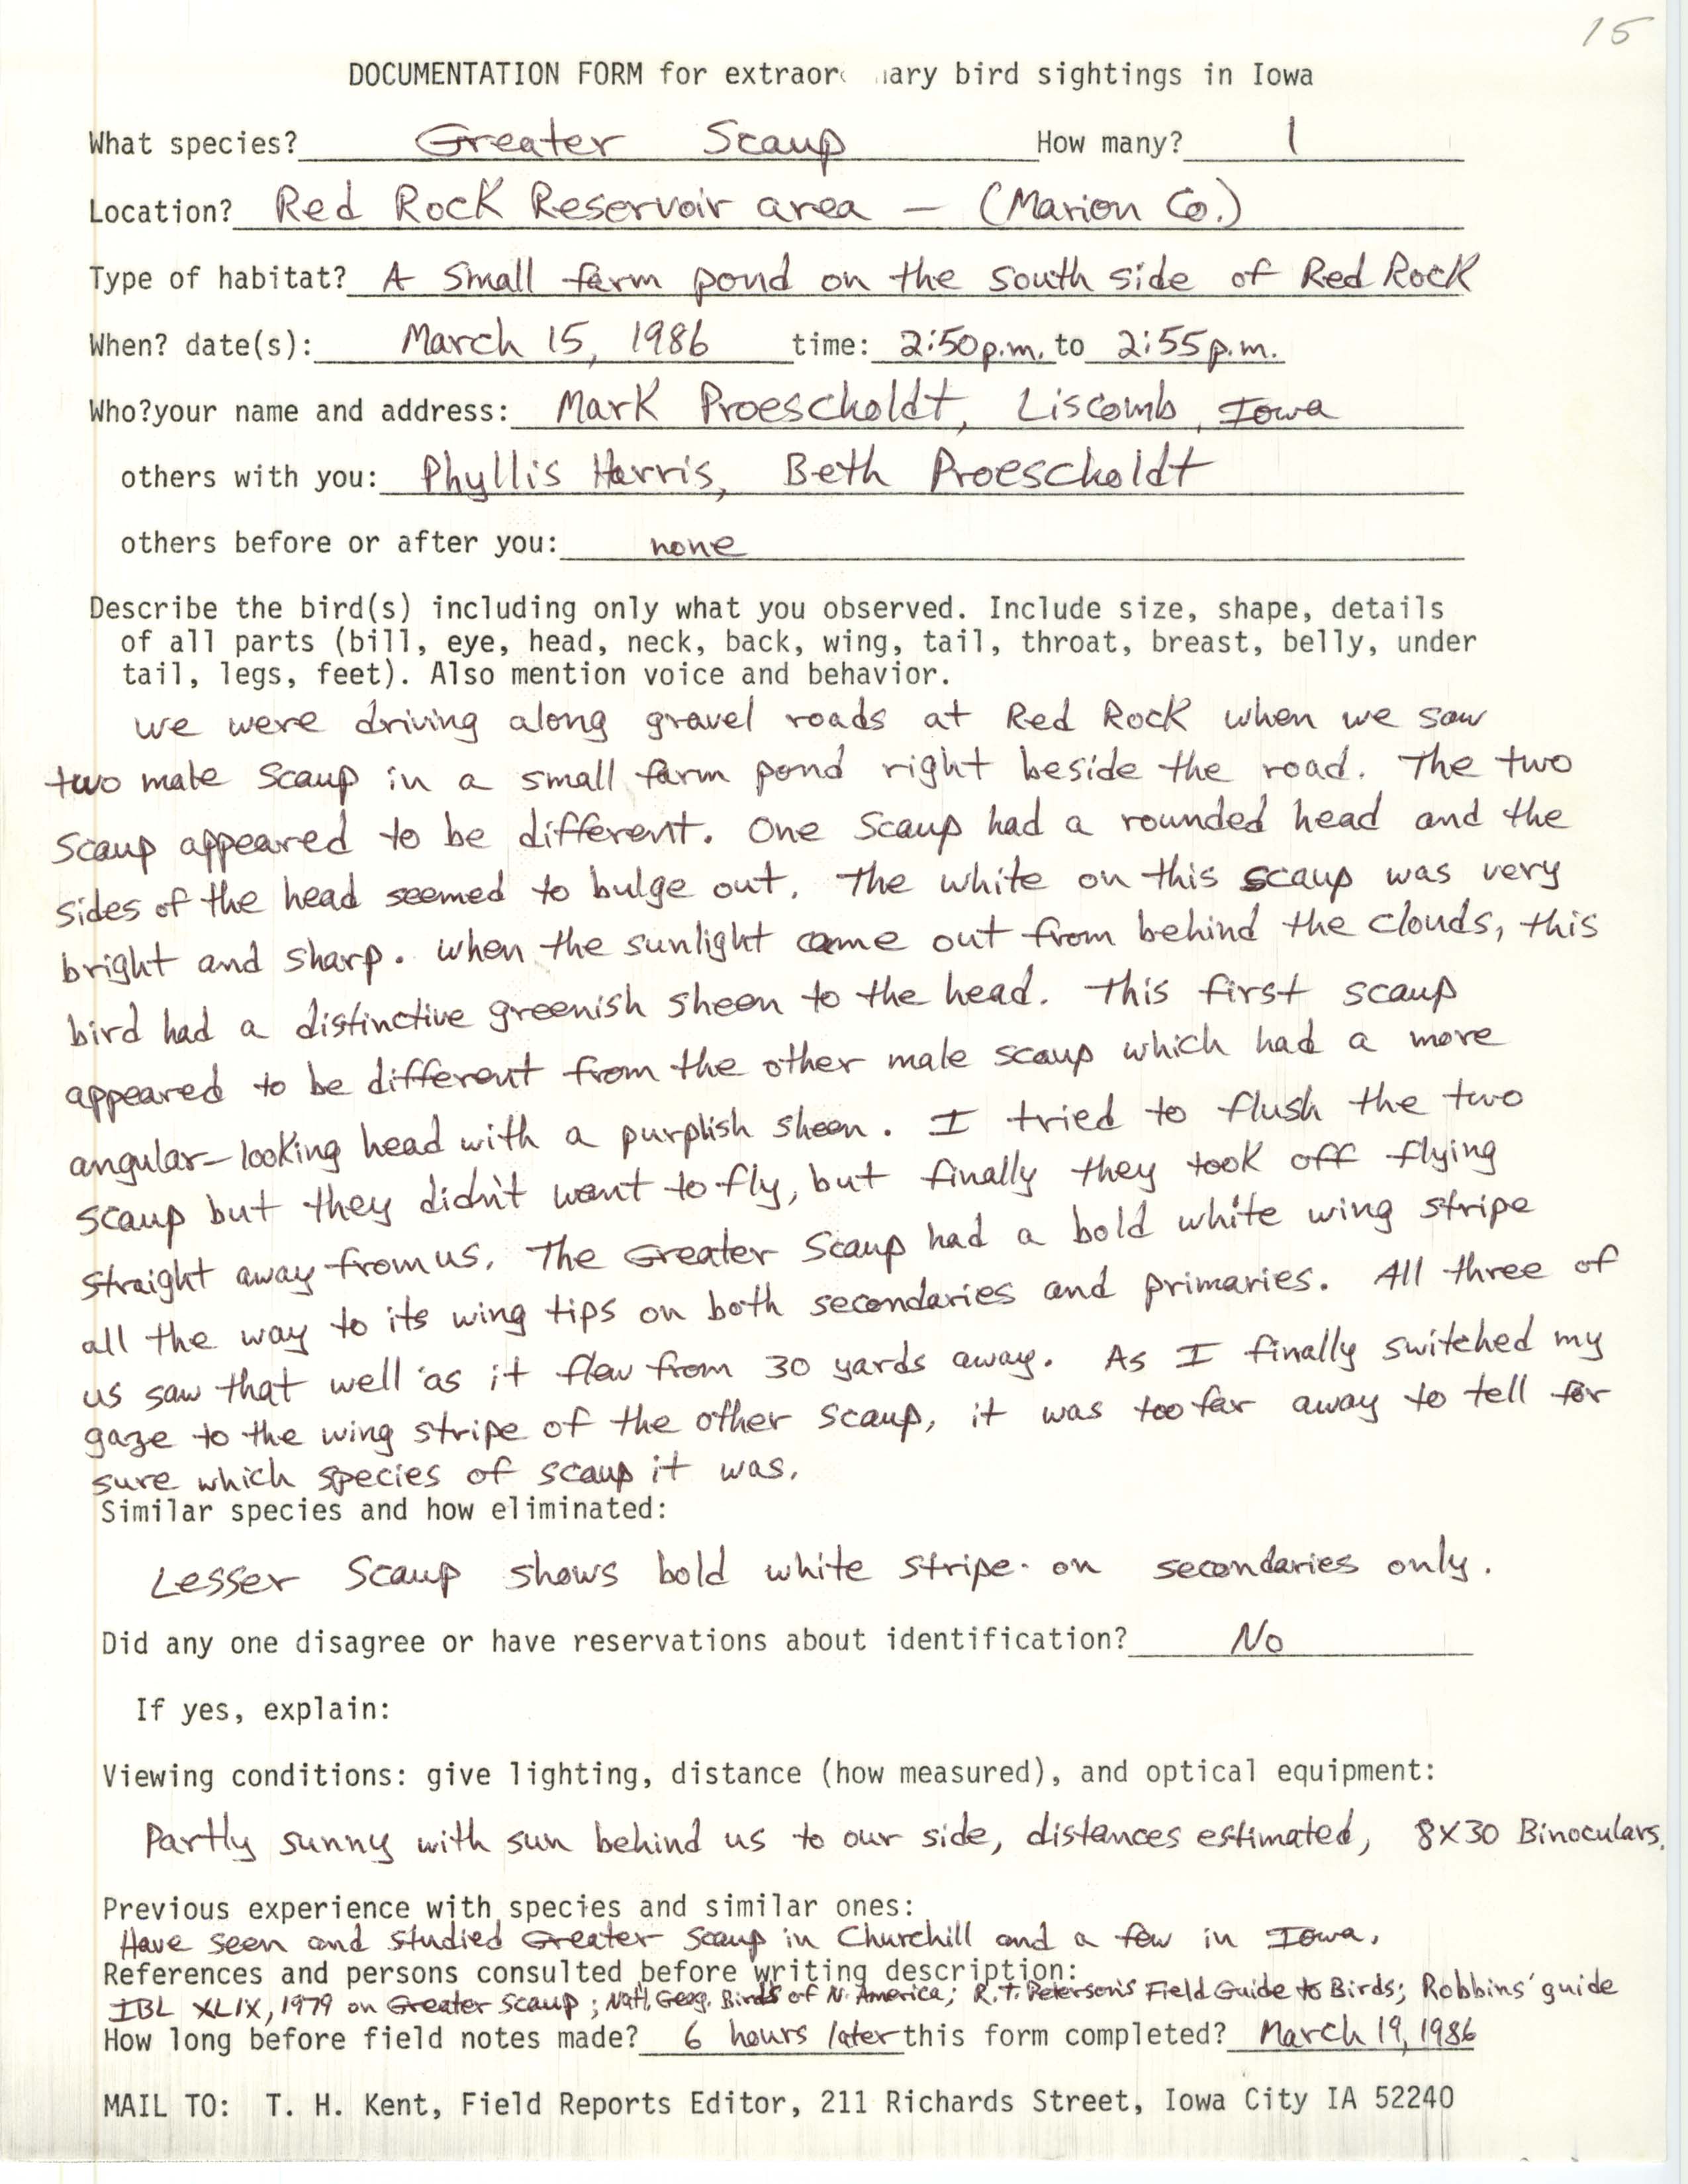 Rare bird documentation form for Greater Scaup at Red Rock Reservoir, 1986